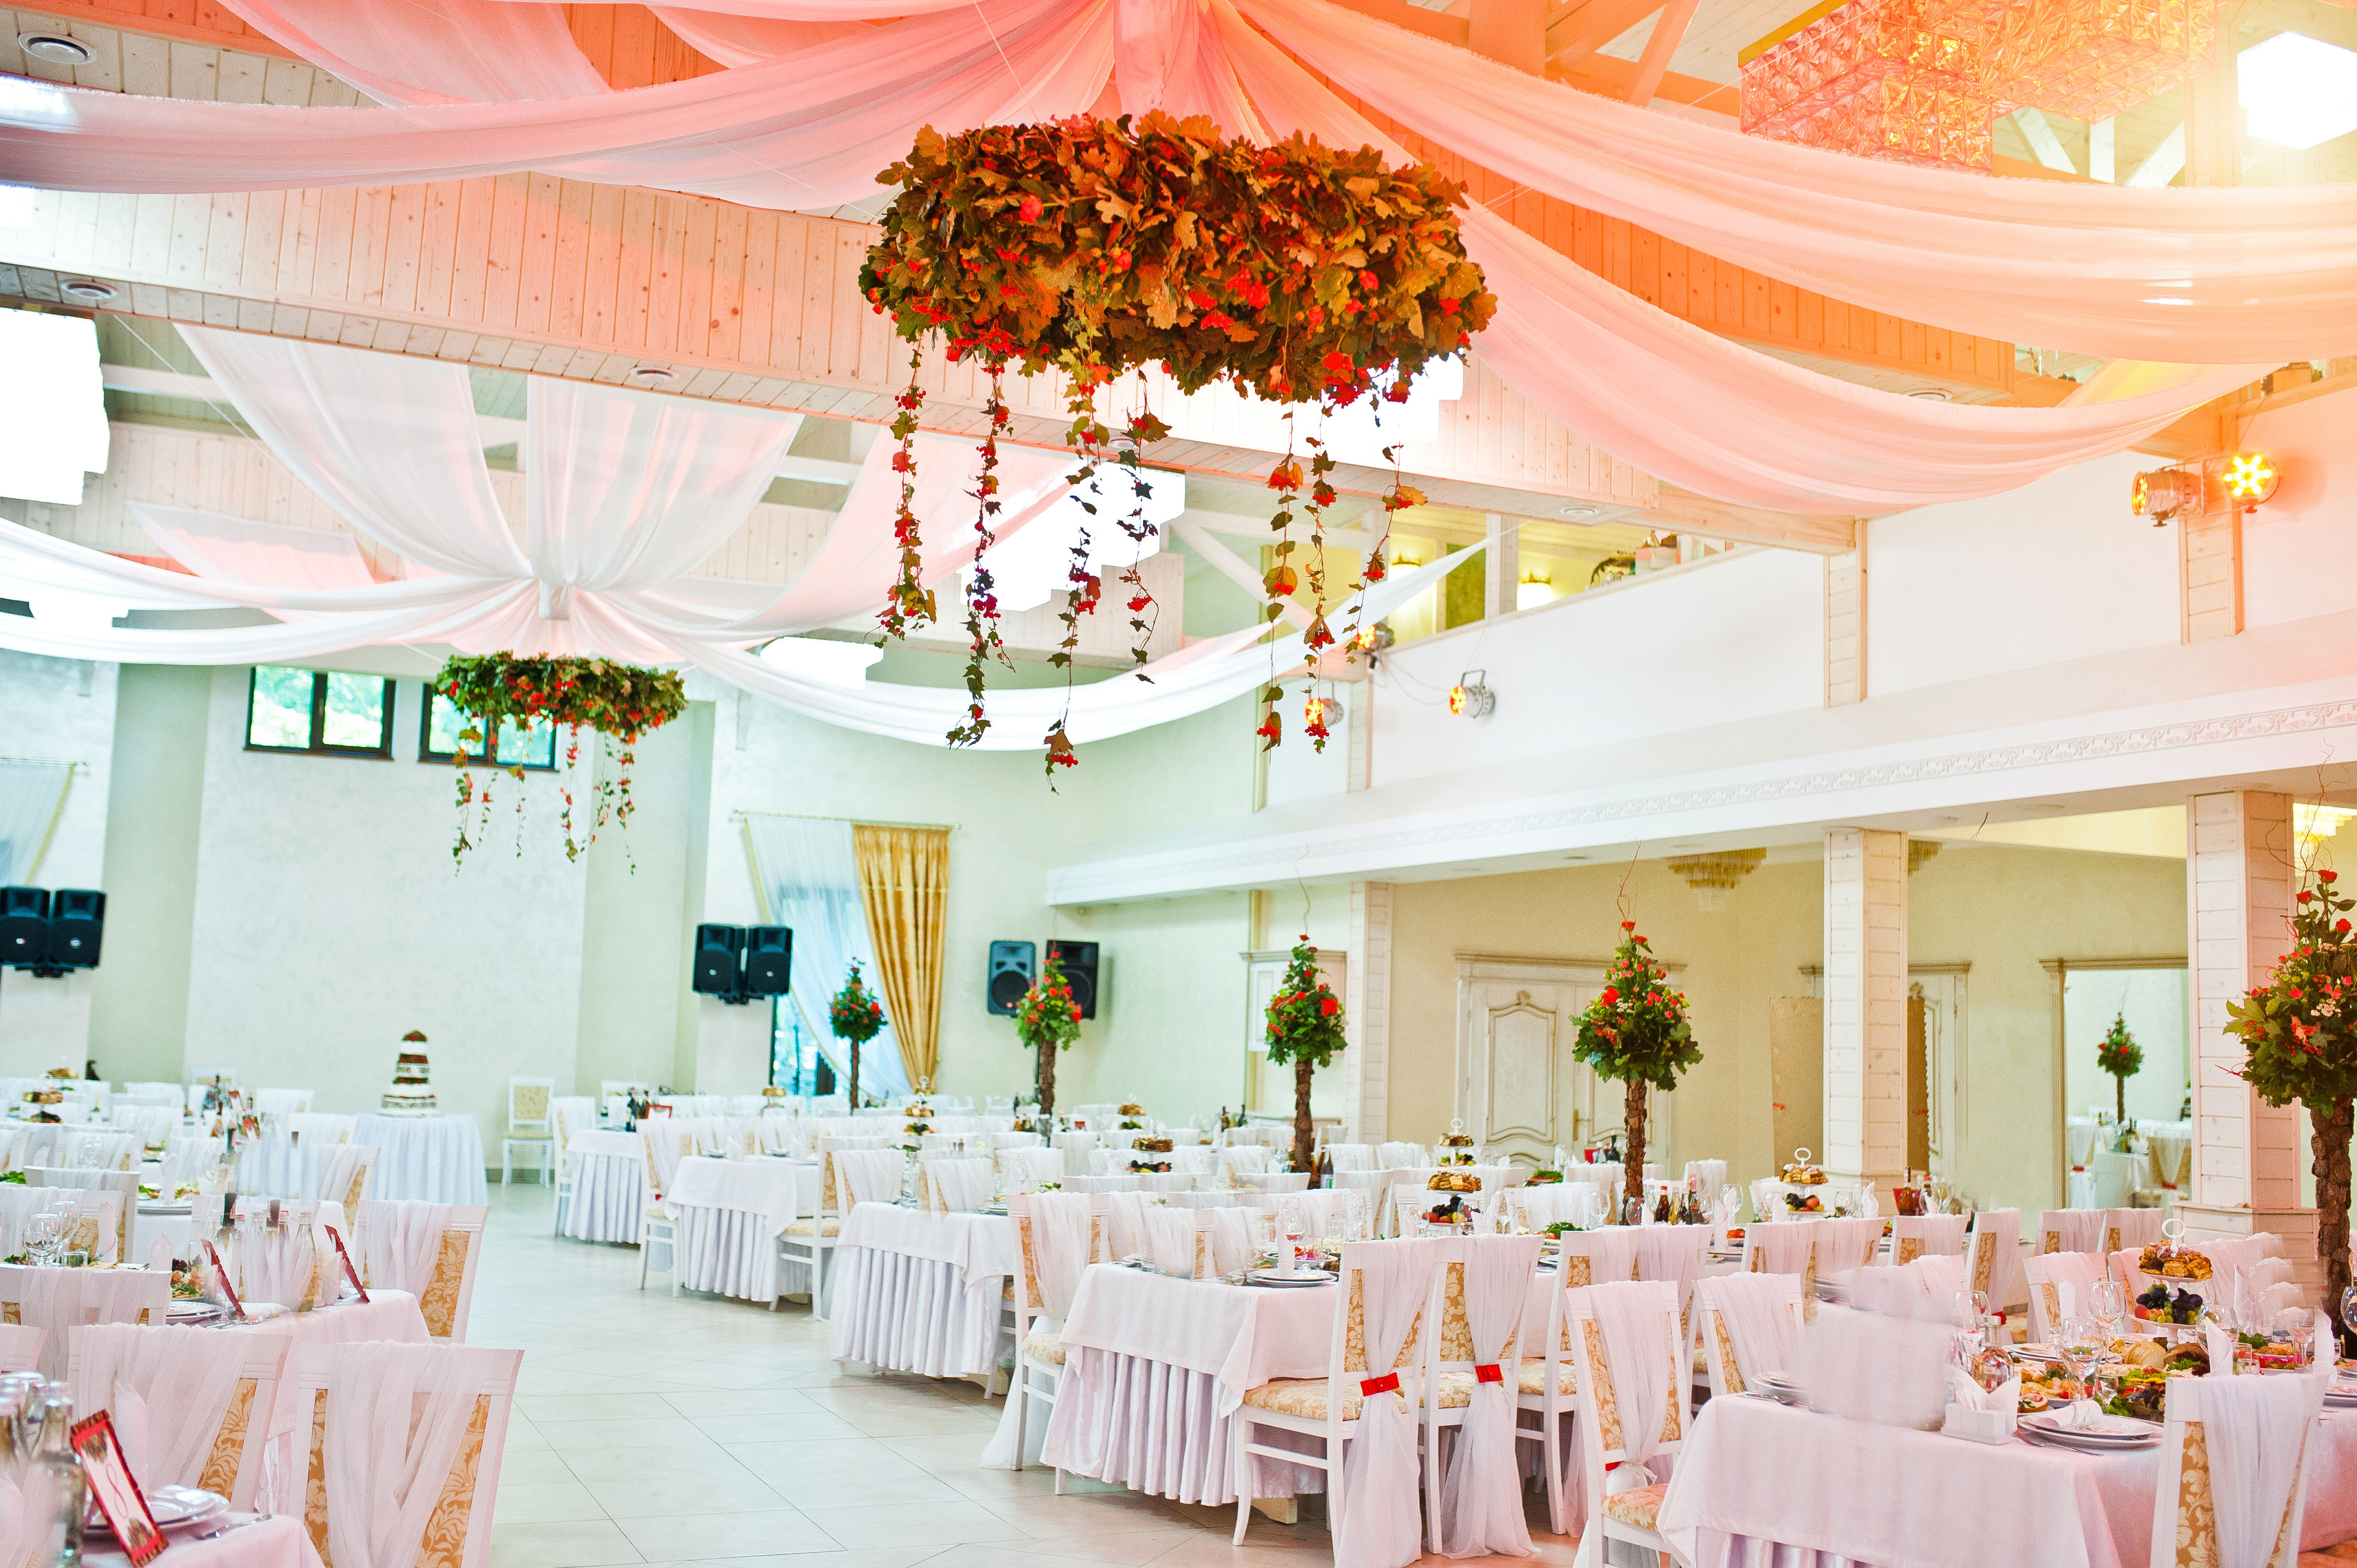 What You Should Know When Considering Banquet Halls for Your Reception